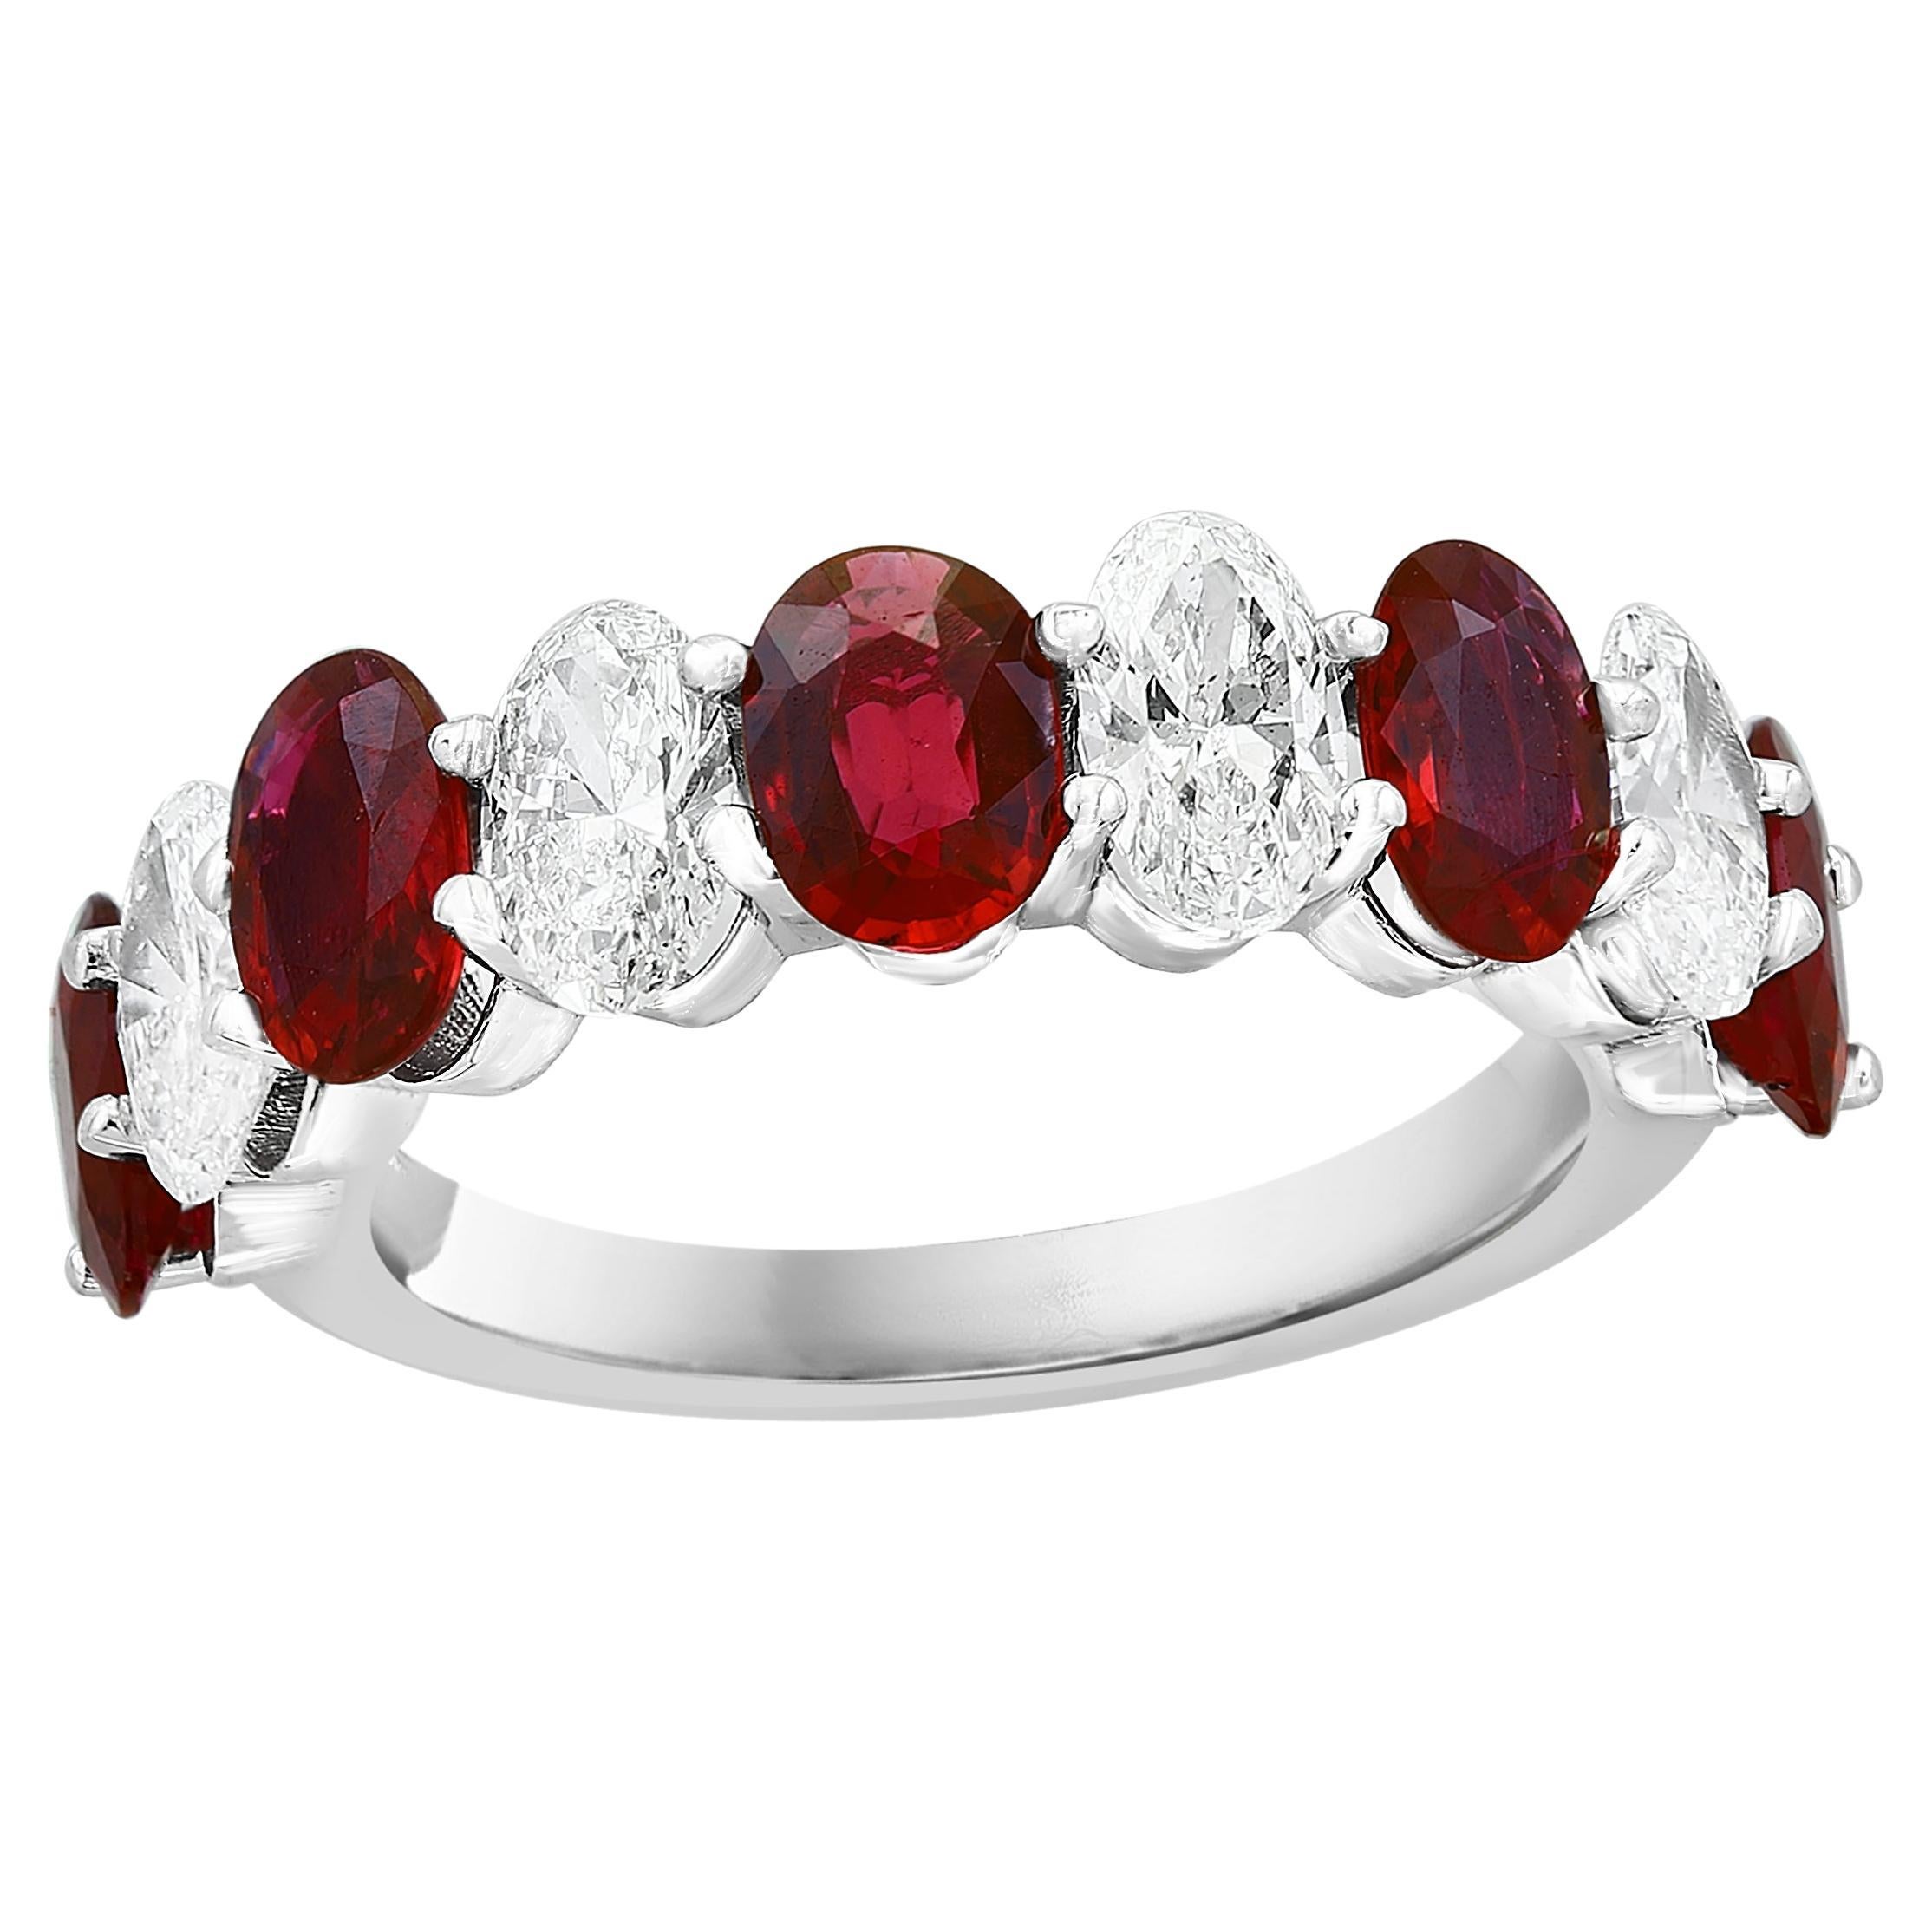 2.23 carat Oval Cut Ruby Diamond Eternity Wedding Band in 14K White Gold For Sale